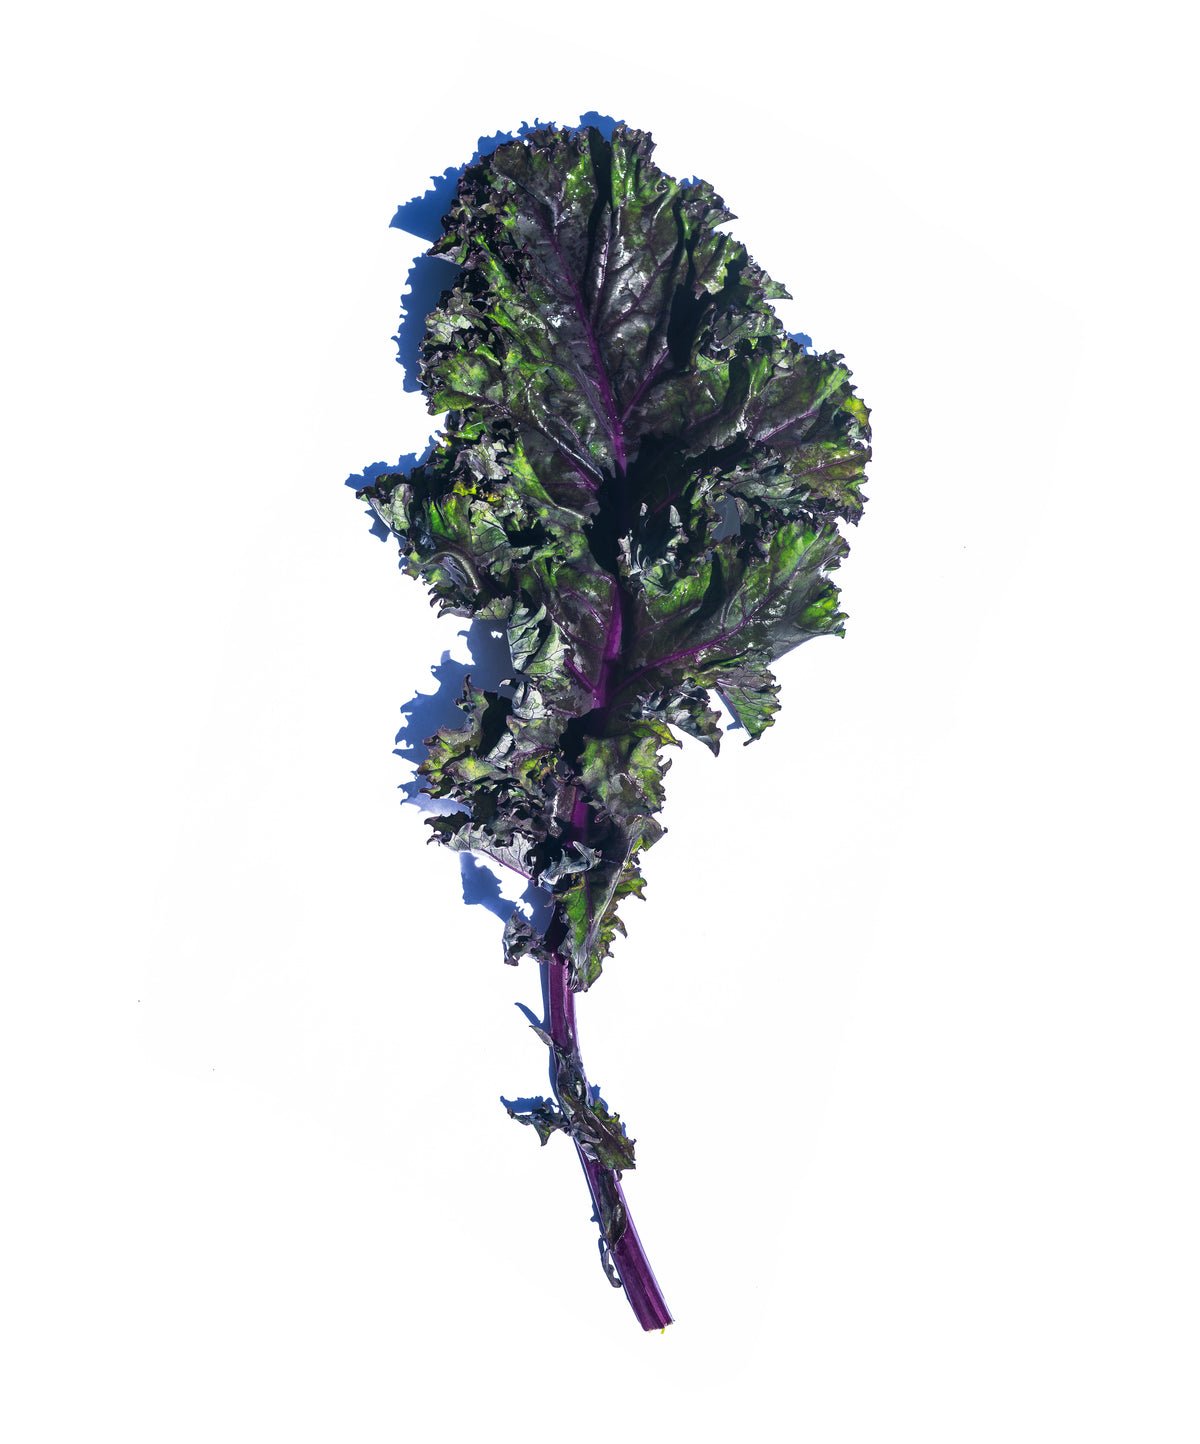 green and purple kale leaf curled on white surface